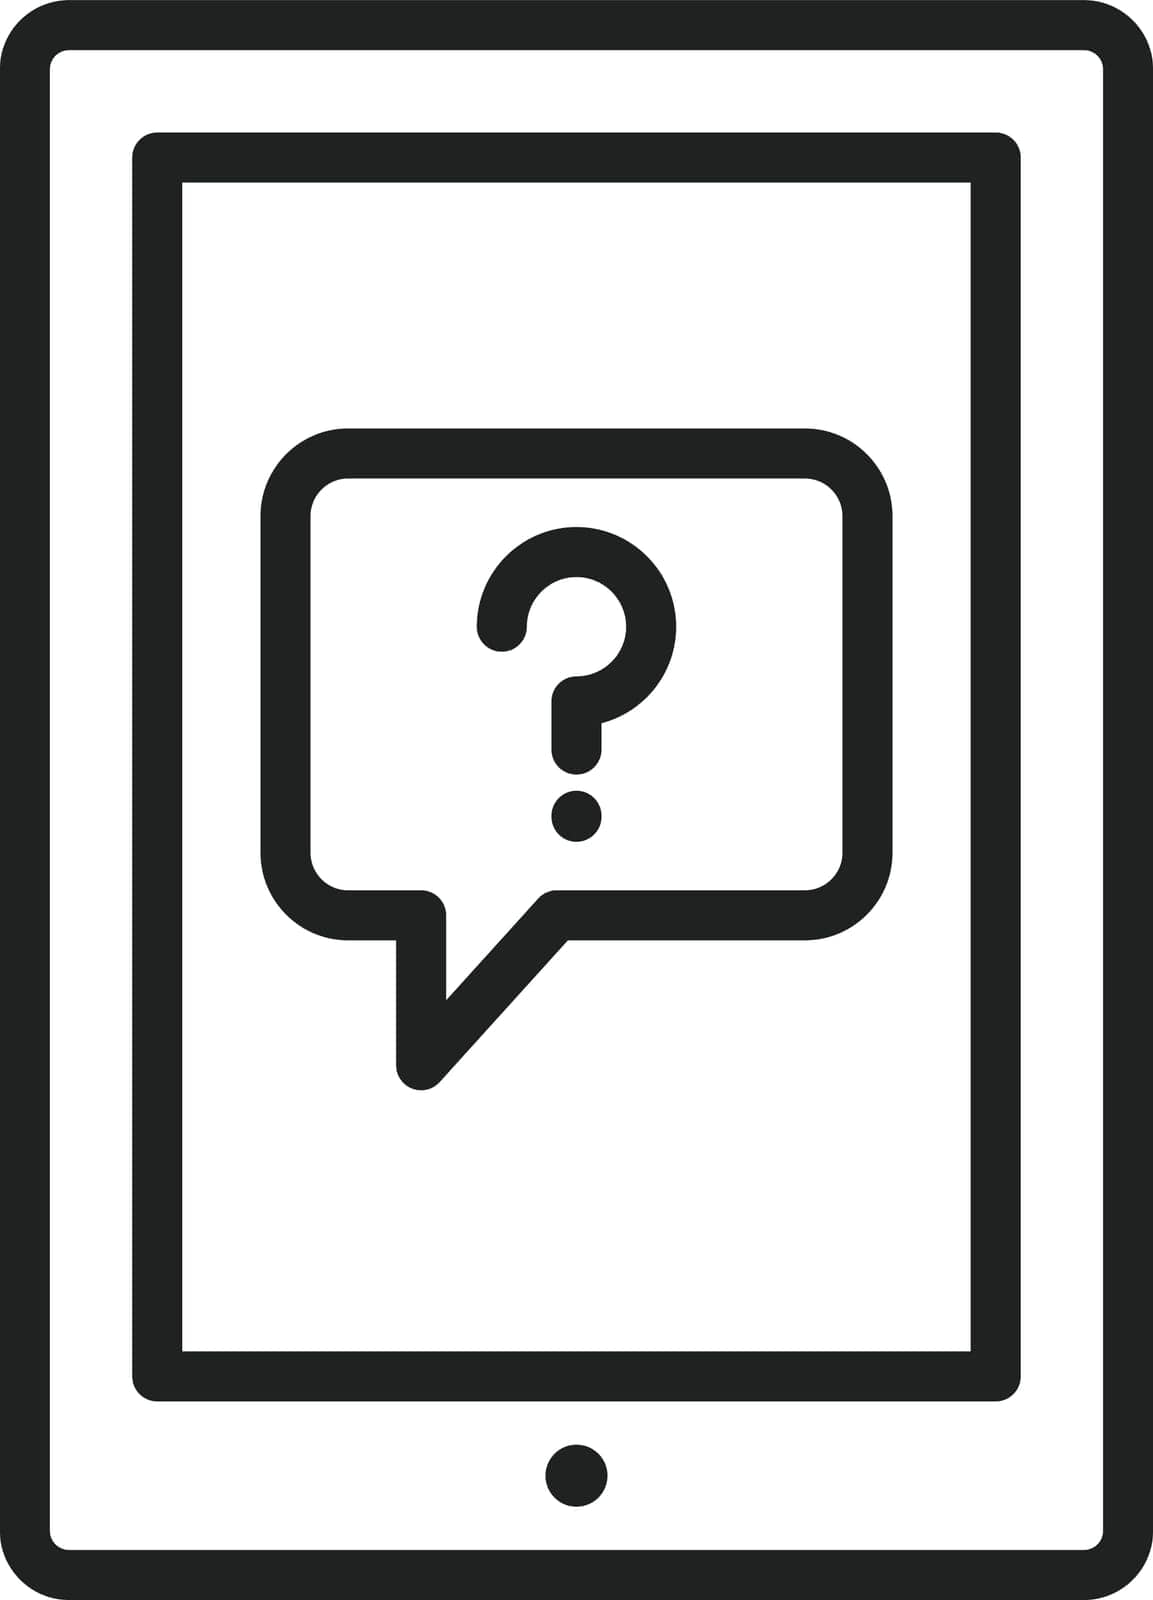 Tablet Question icon vector image. Suitable for mobile application web application and print media.